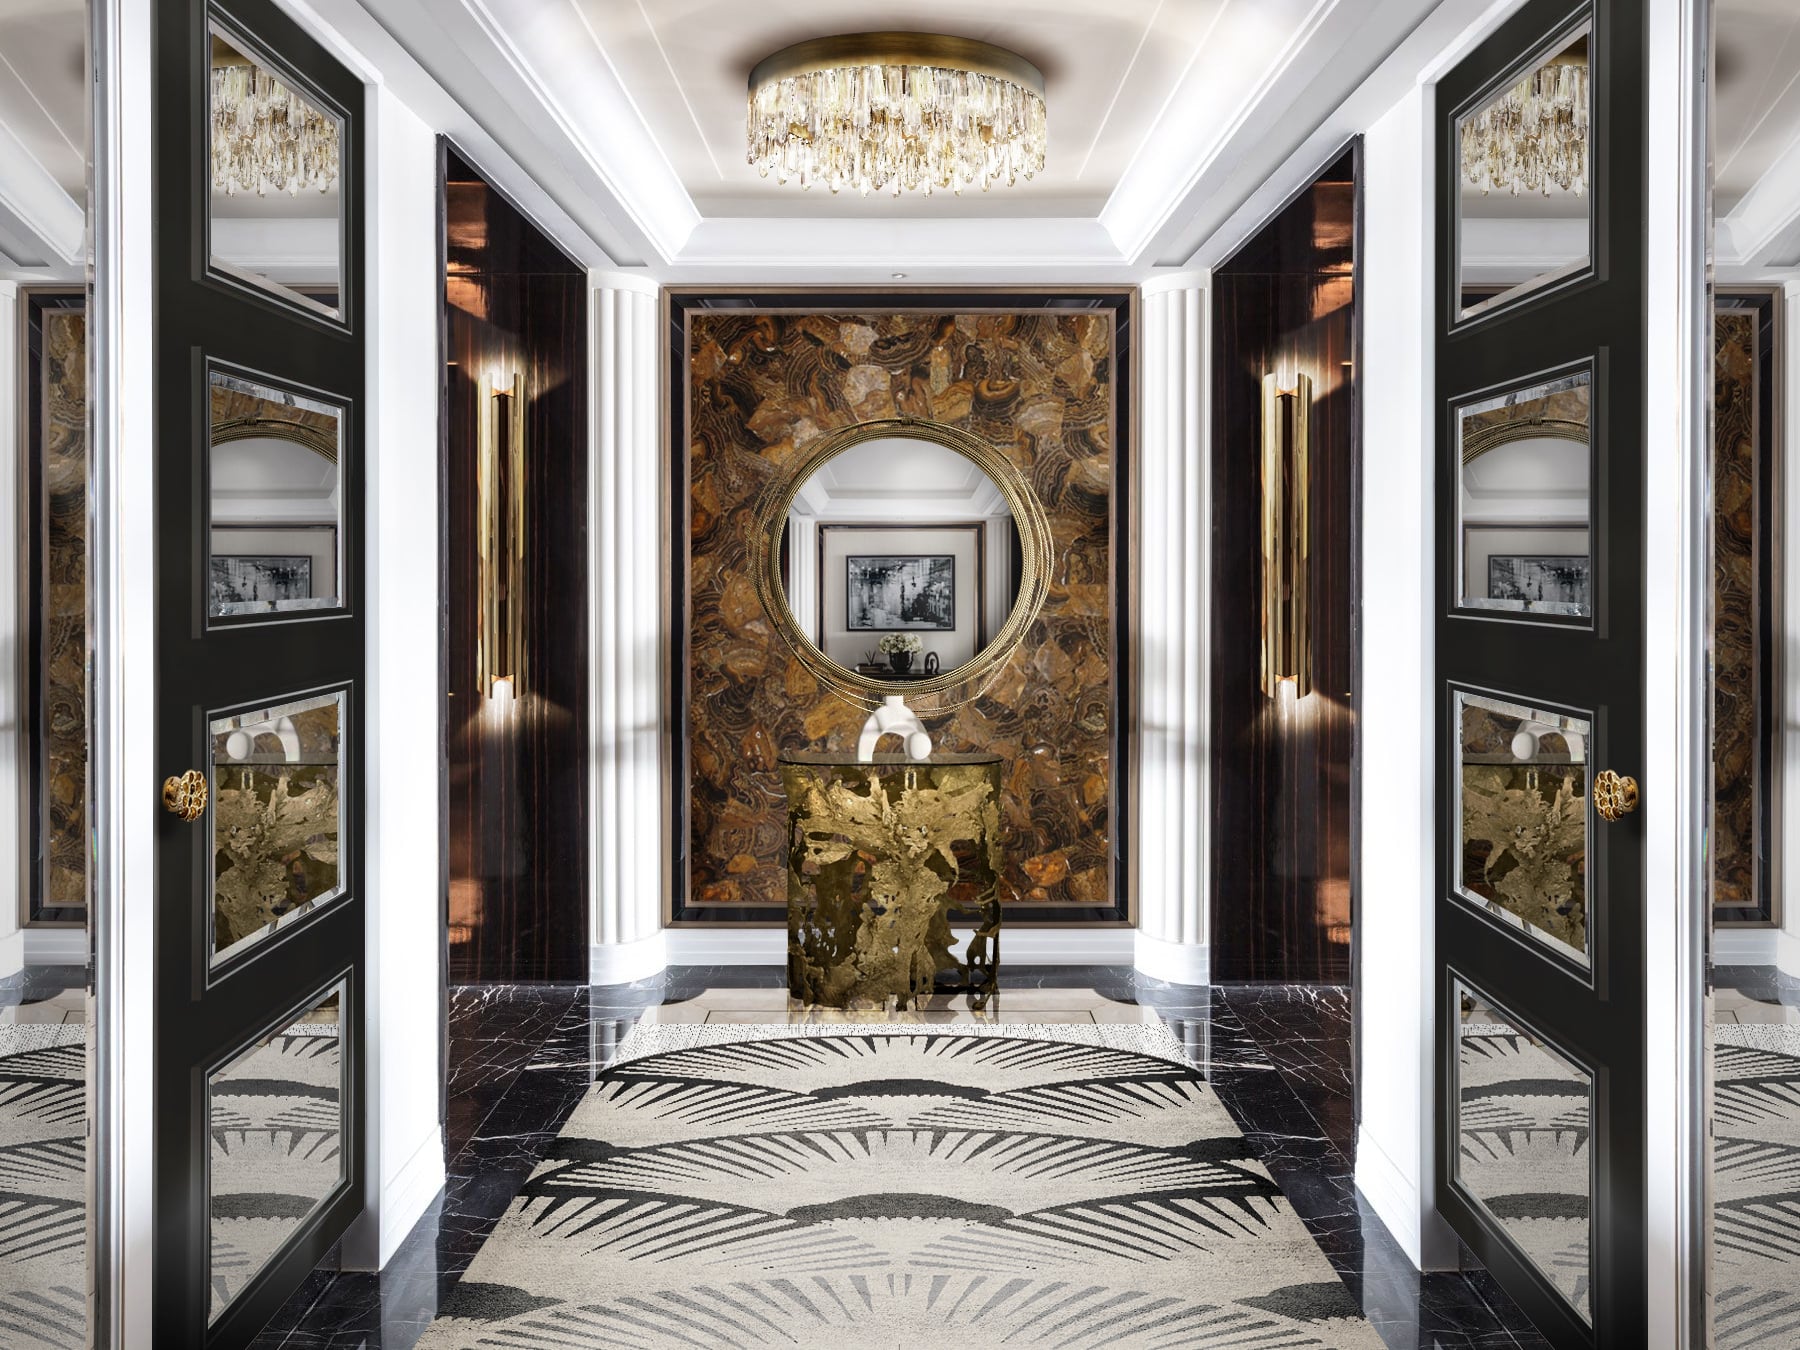 Modern Hallway Decor With Golden Details - Home'Society